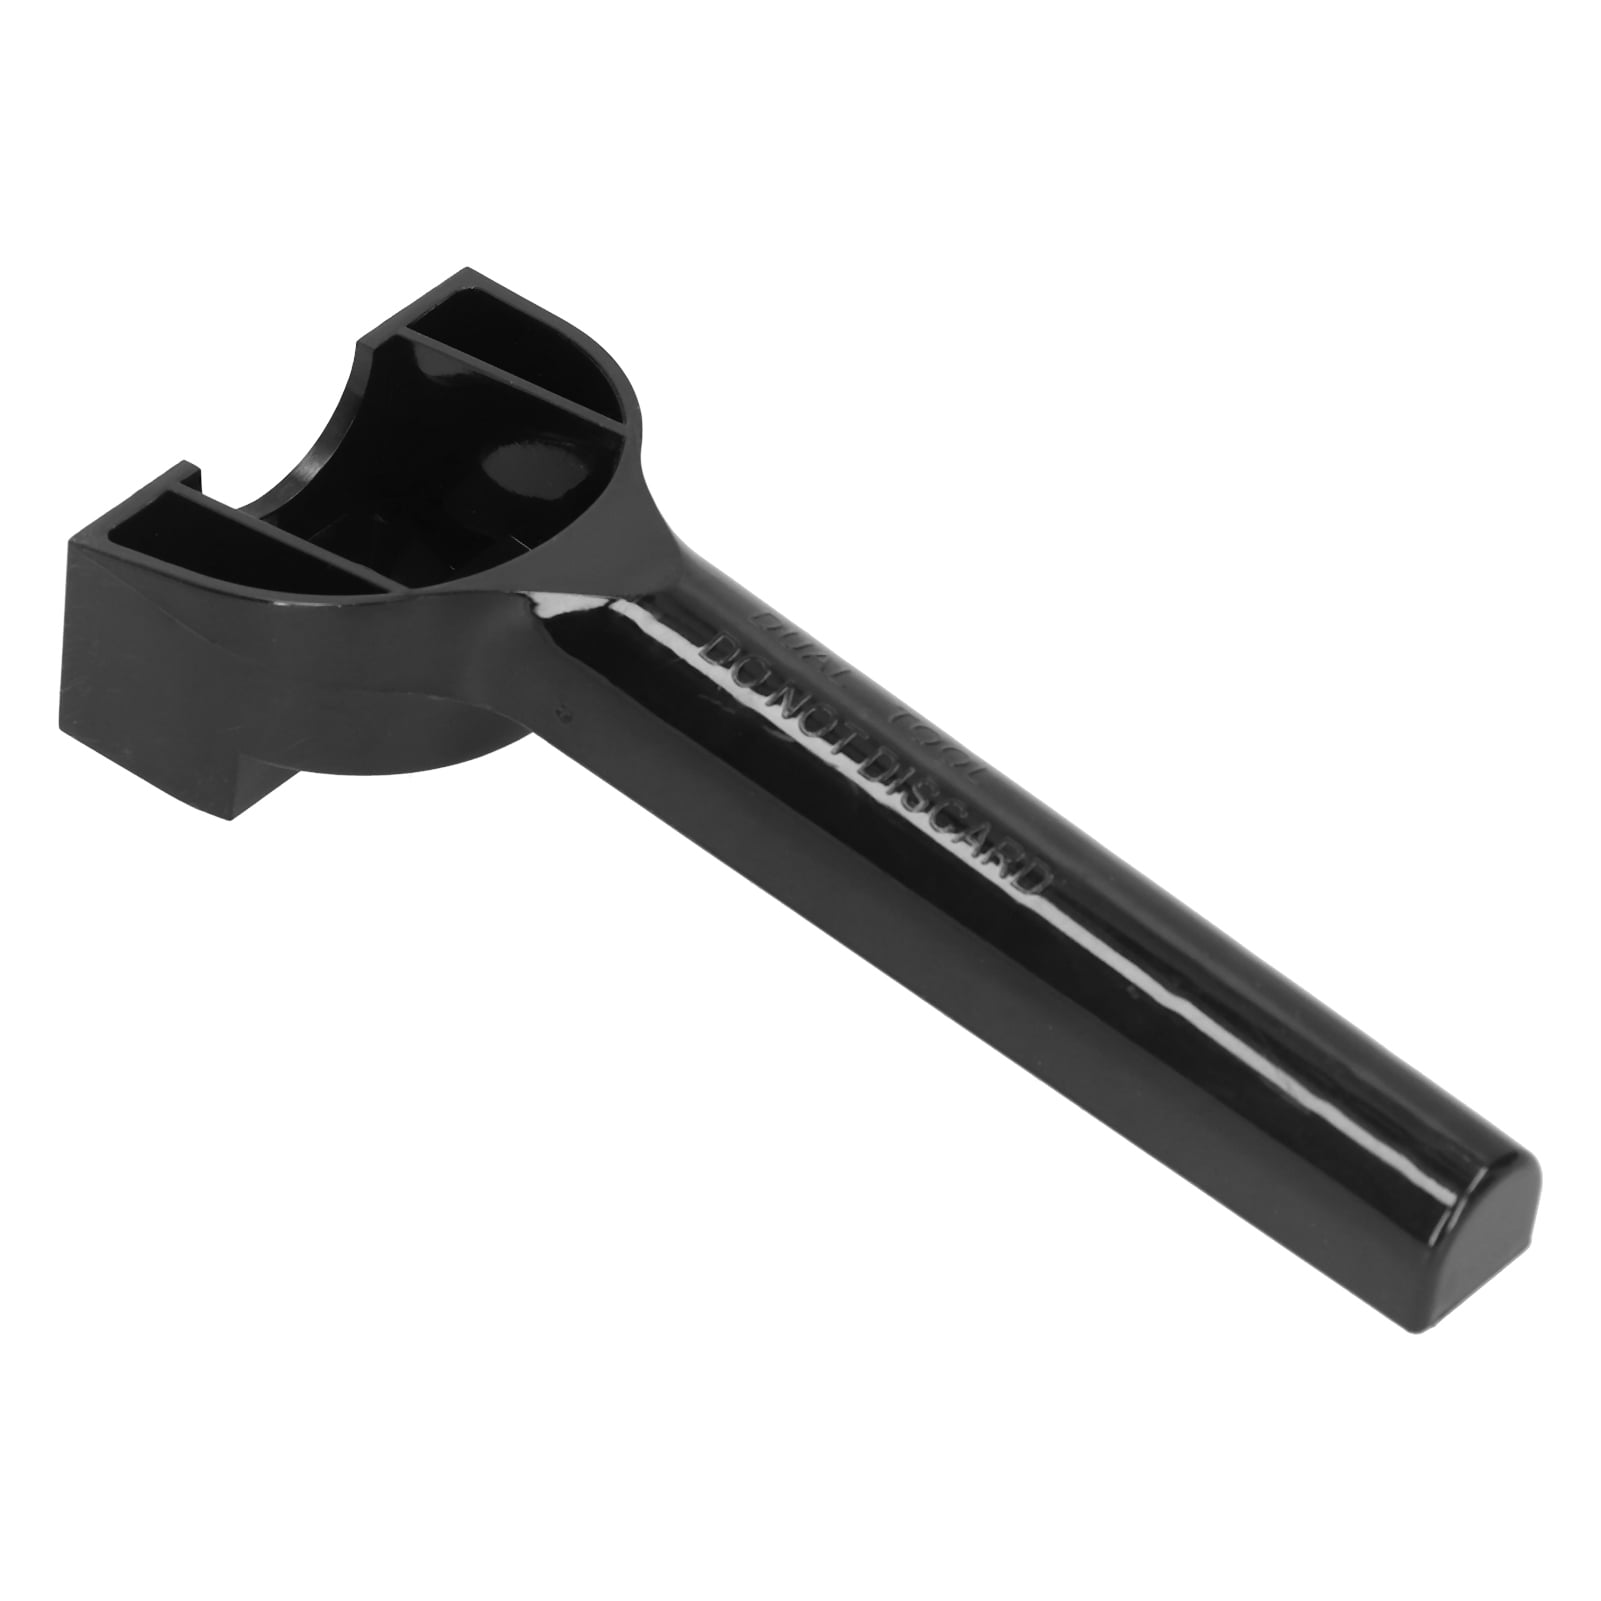 VITA-MIX 15596 RETAINER NUT WRENCH FOR BAR BLENDERS & SMOOTHIE MIXERS MAKERS